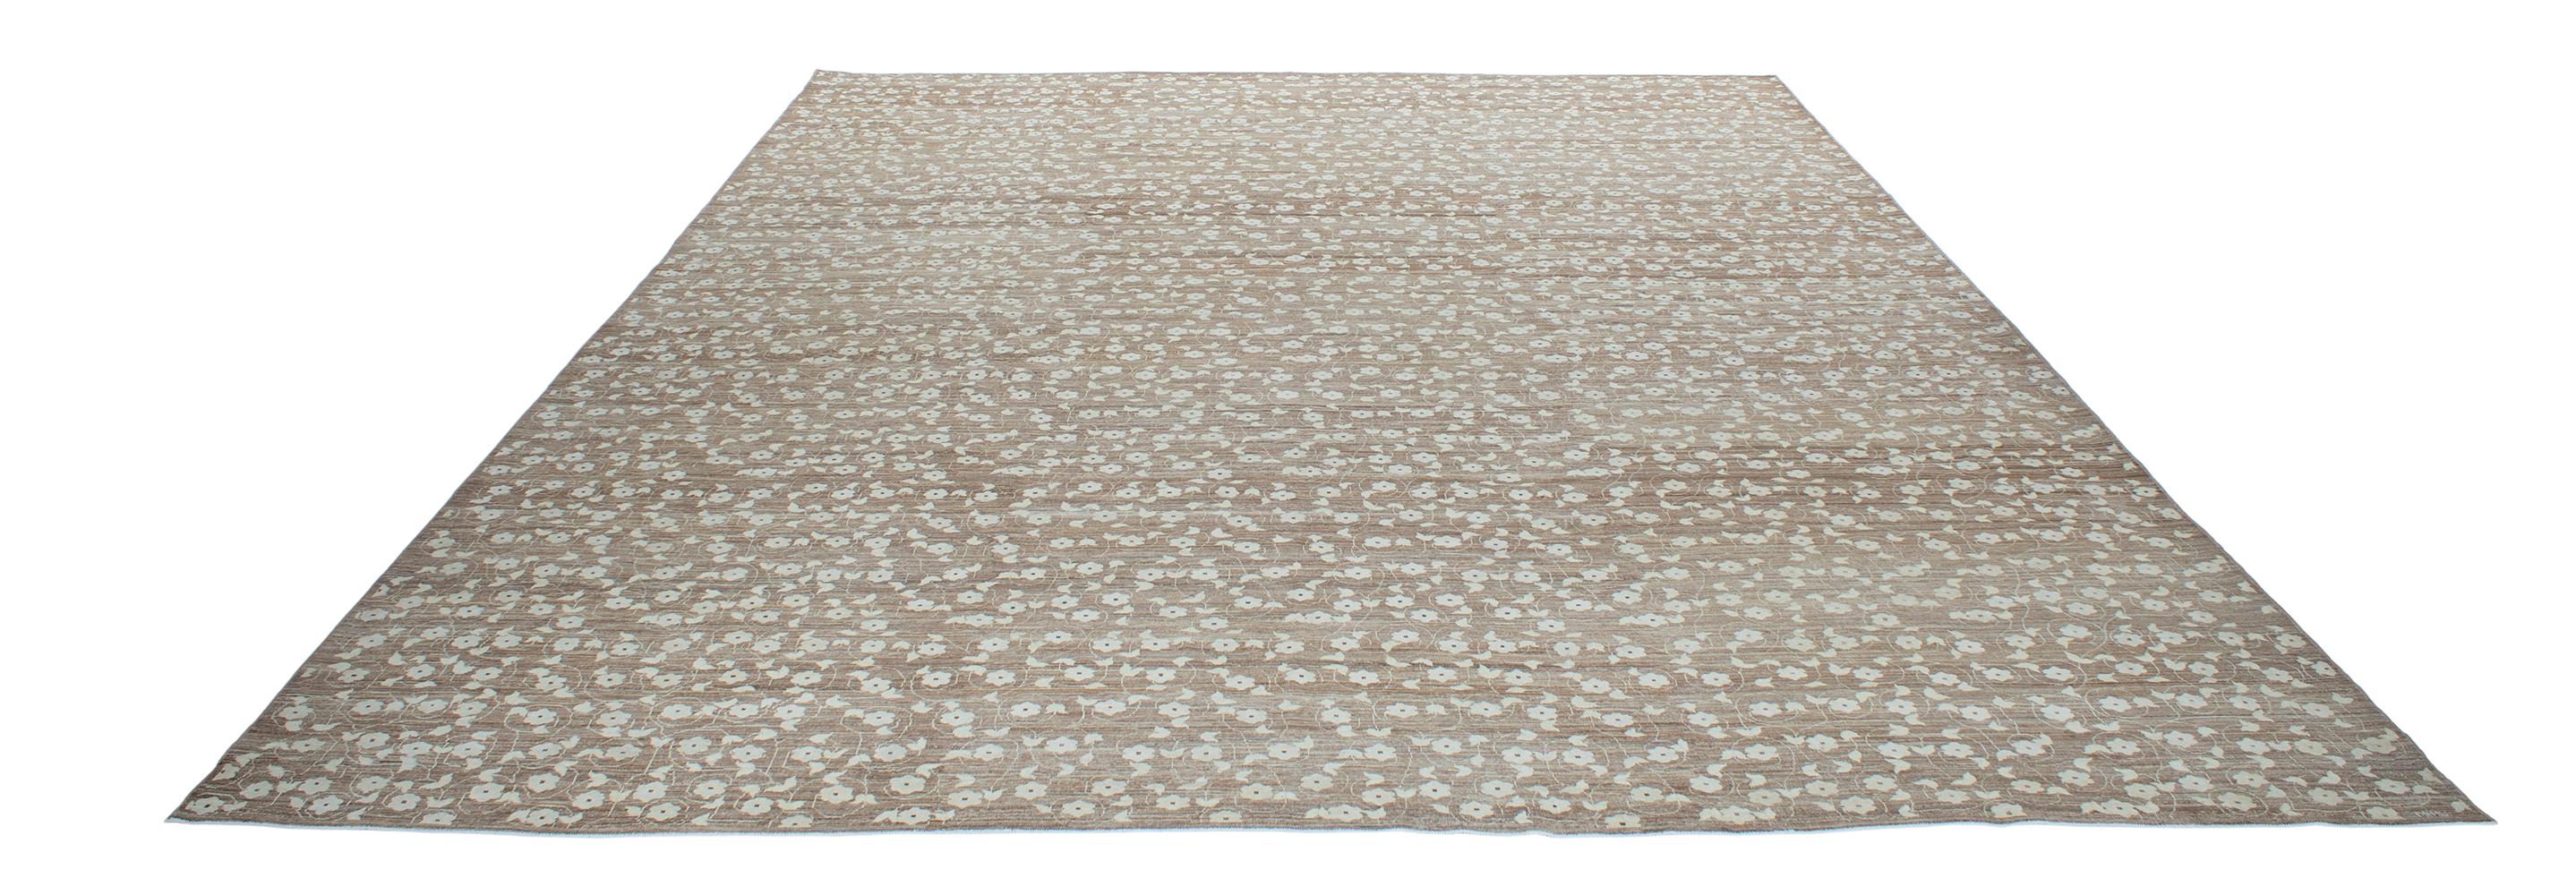 French Provincial Contemporary Decorative Handknotted Rug with a Floral Design